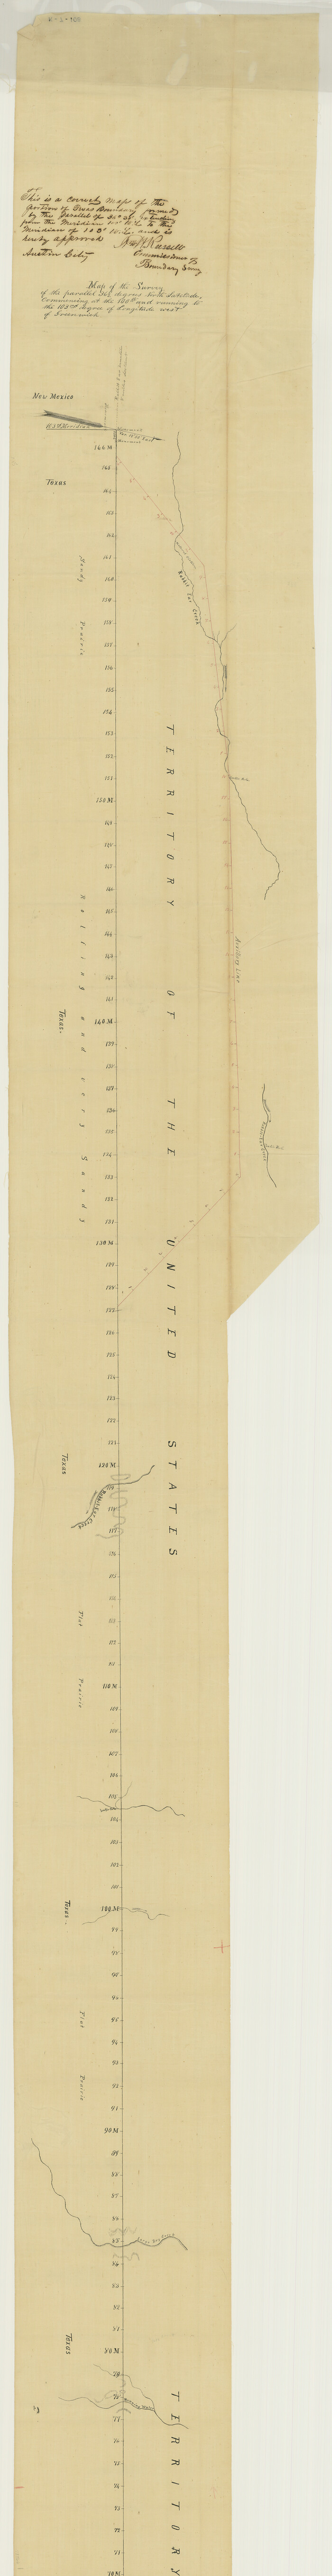 73566, Map of the Survey of the Parallel 36 1/2 Degrees North Latitude, Commencing at the 100th and Running to the 103rd Degree of Longitude West of Greenwich, General Map Collection